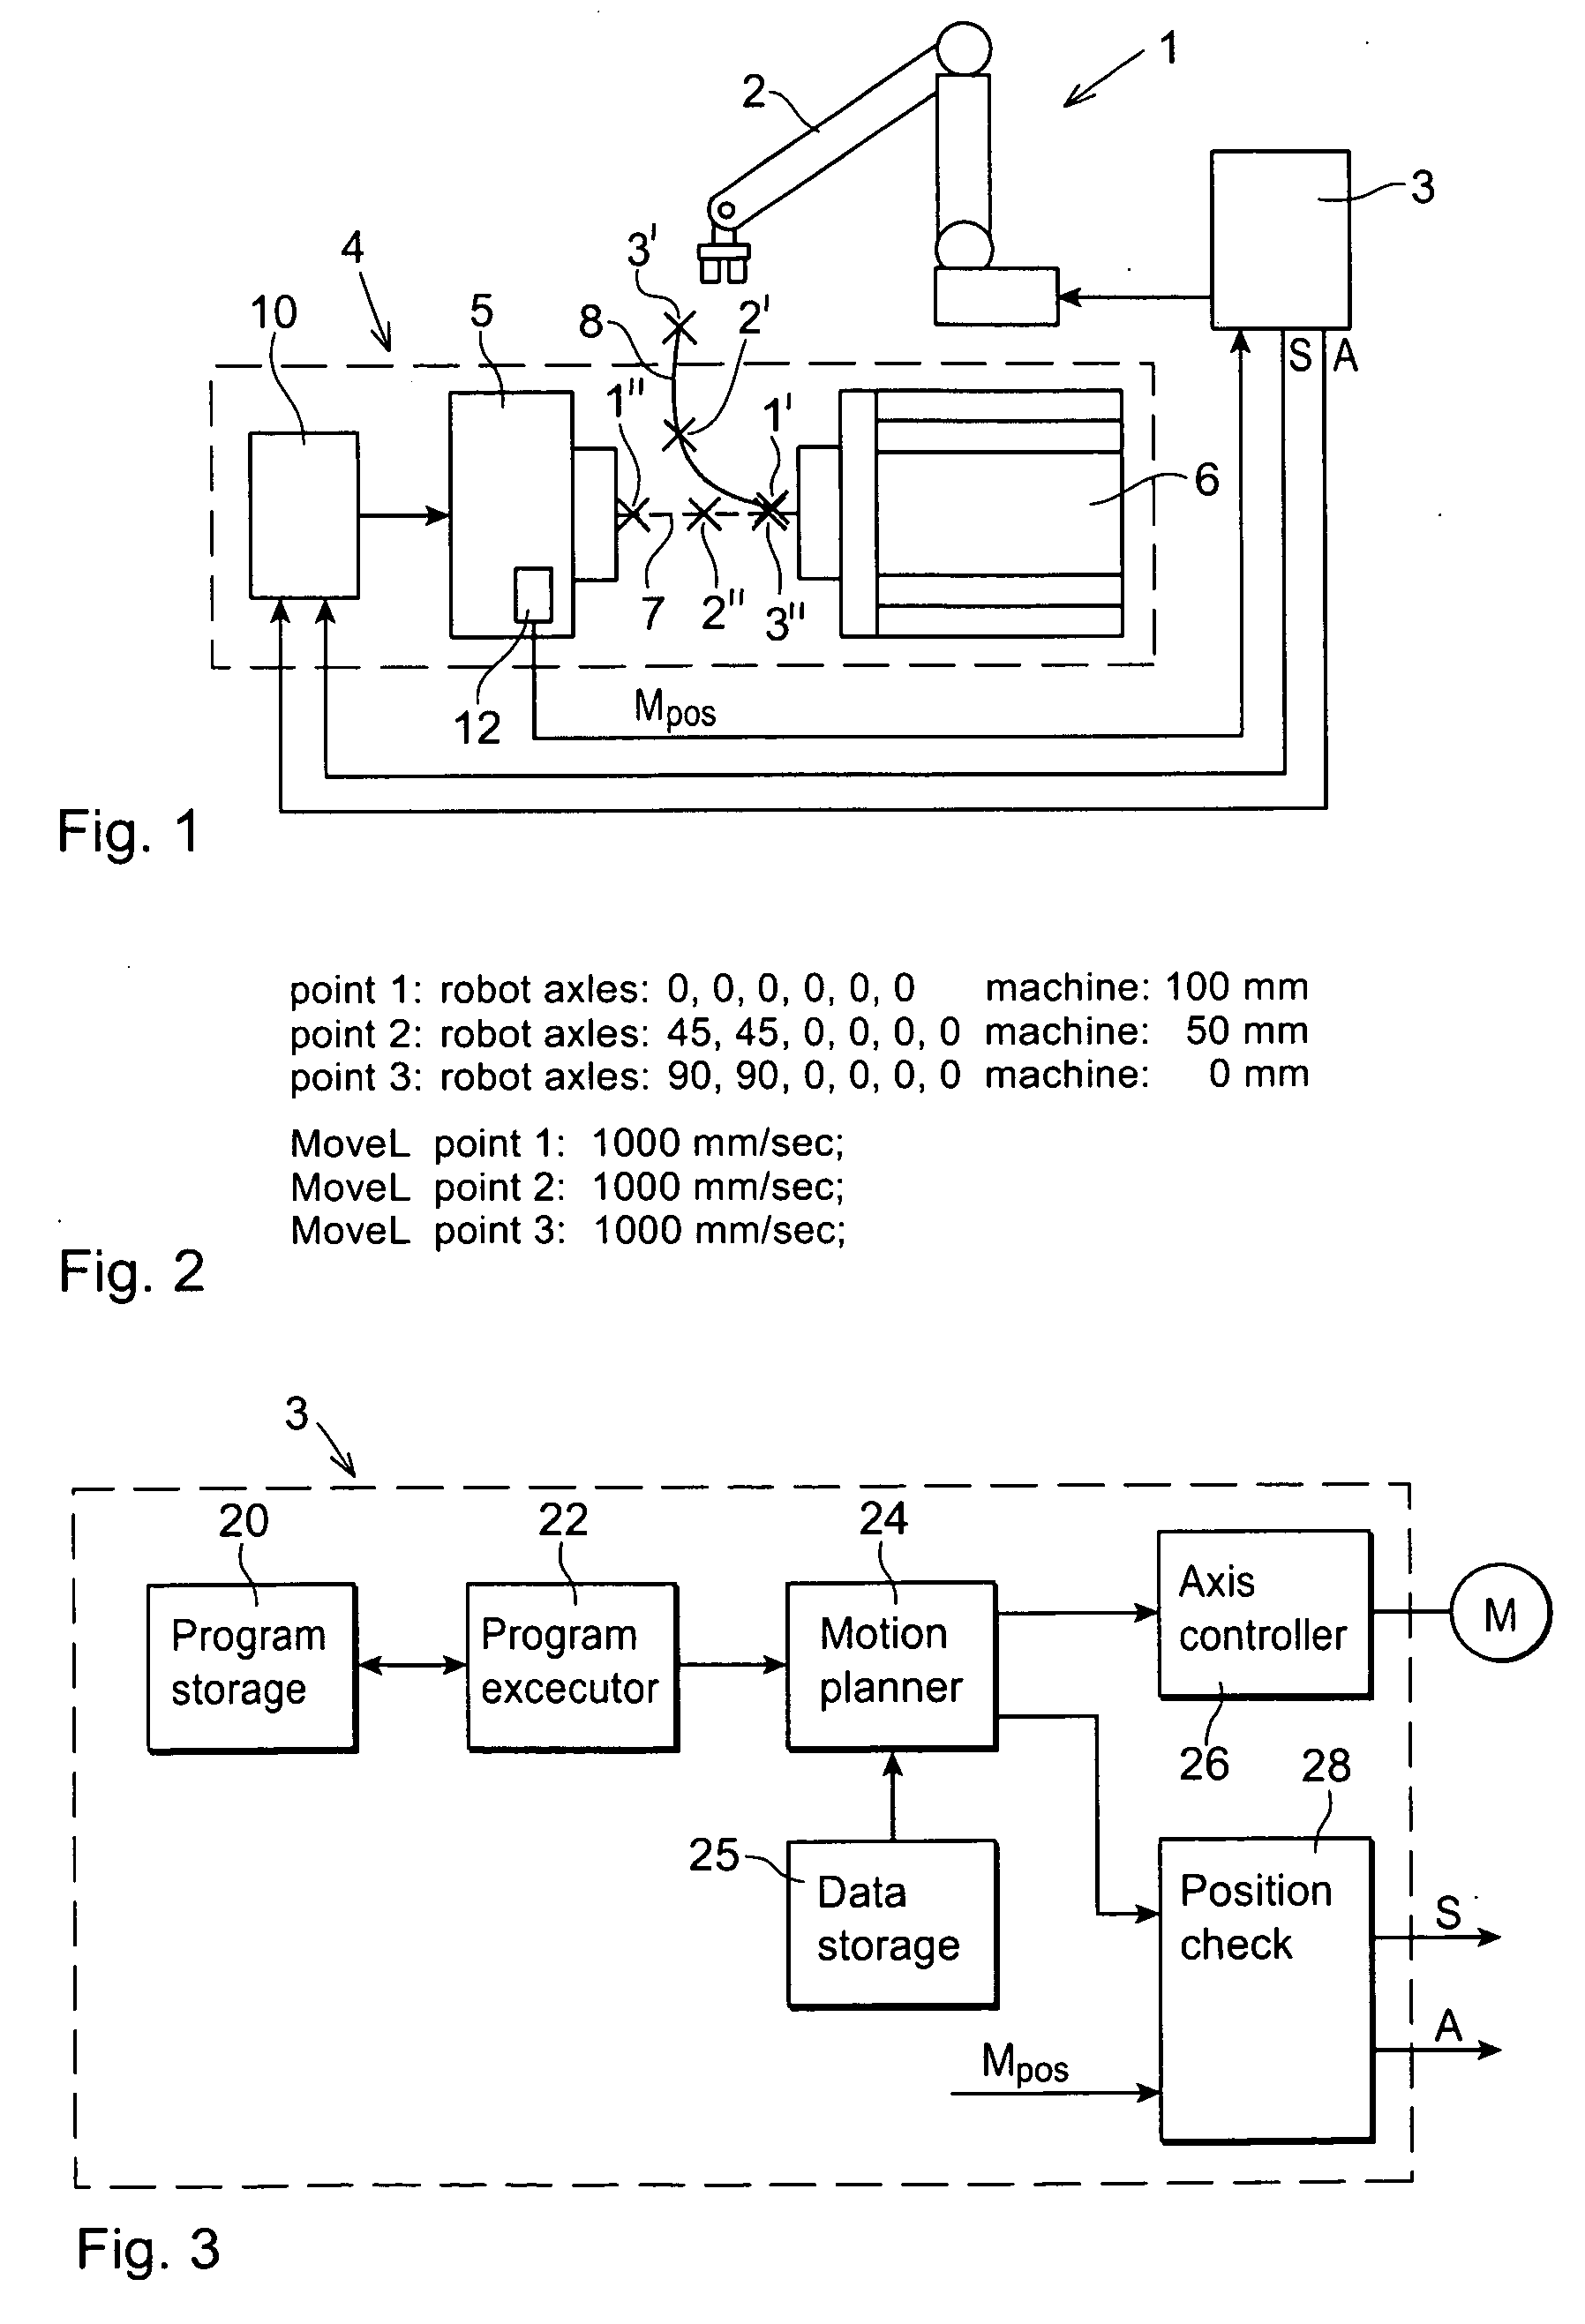 Industrial Robot Tending A Machine And A Method For Controlling An Industrial Robot Tending A Machine